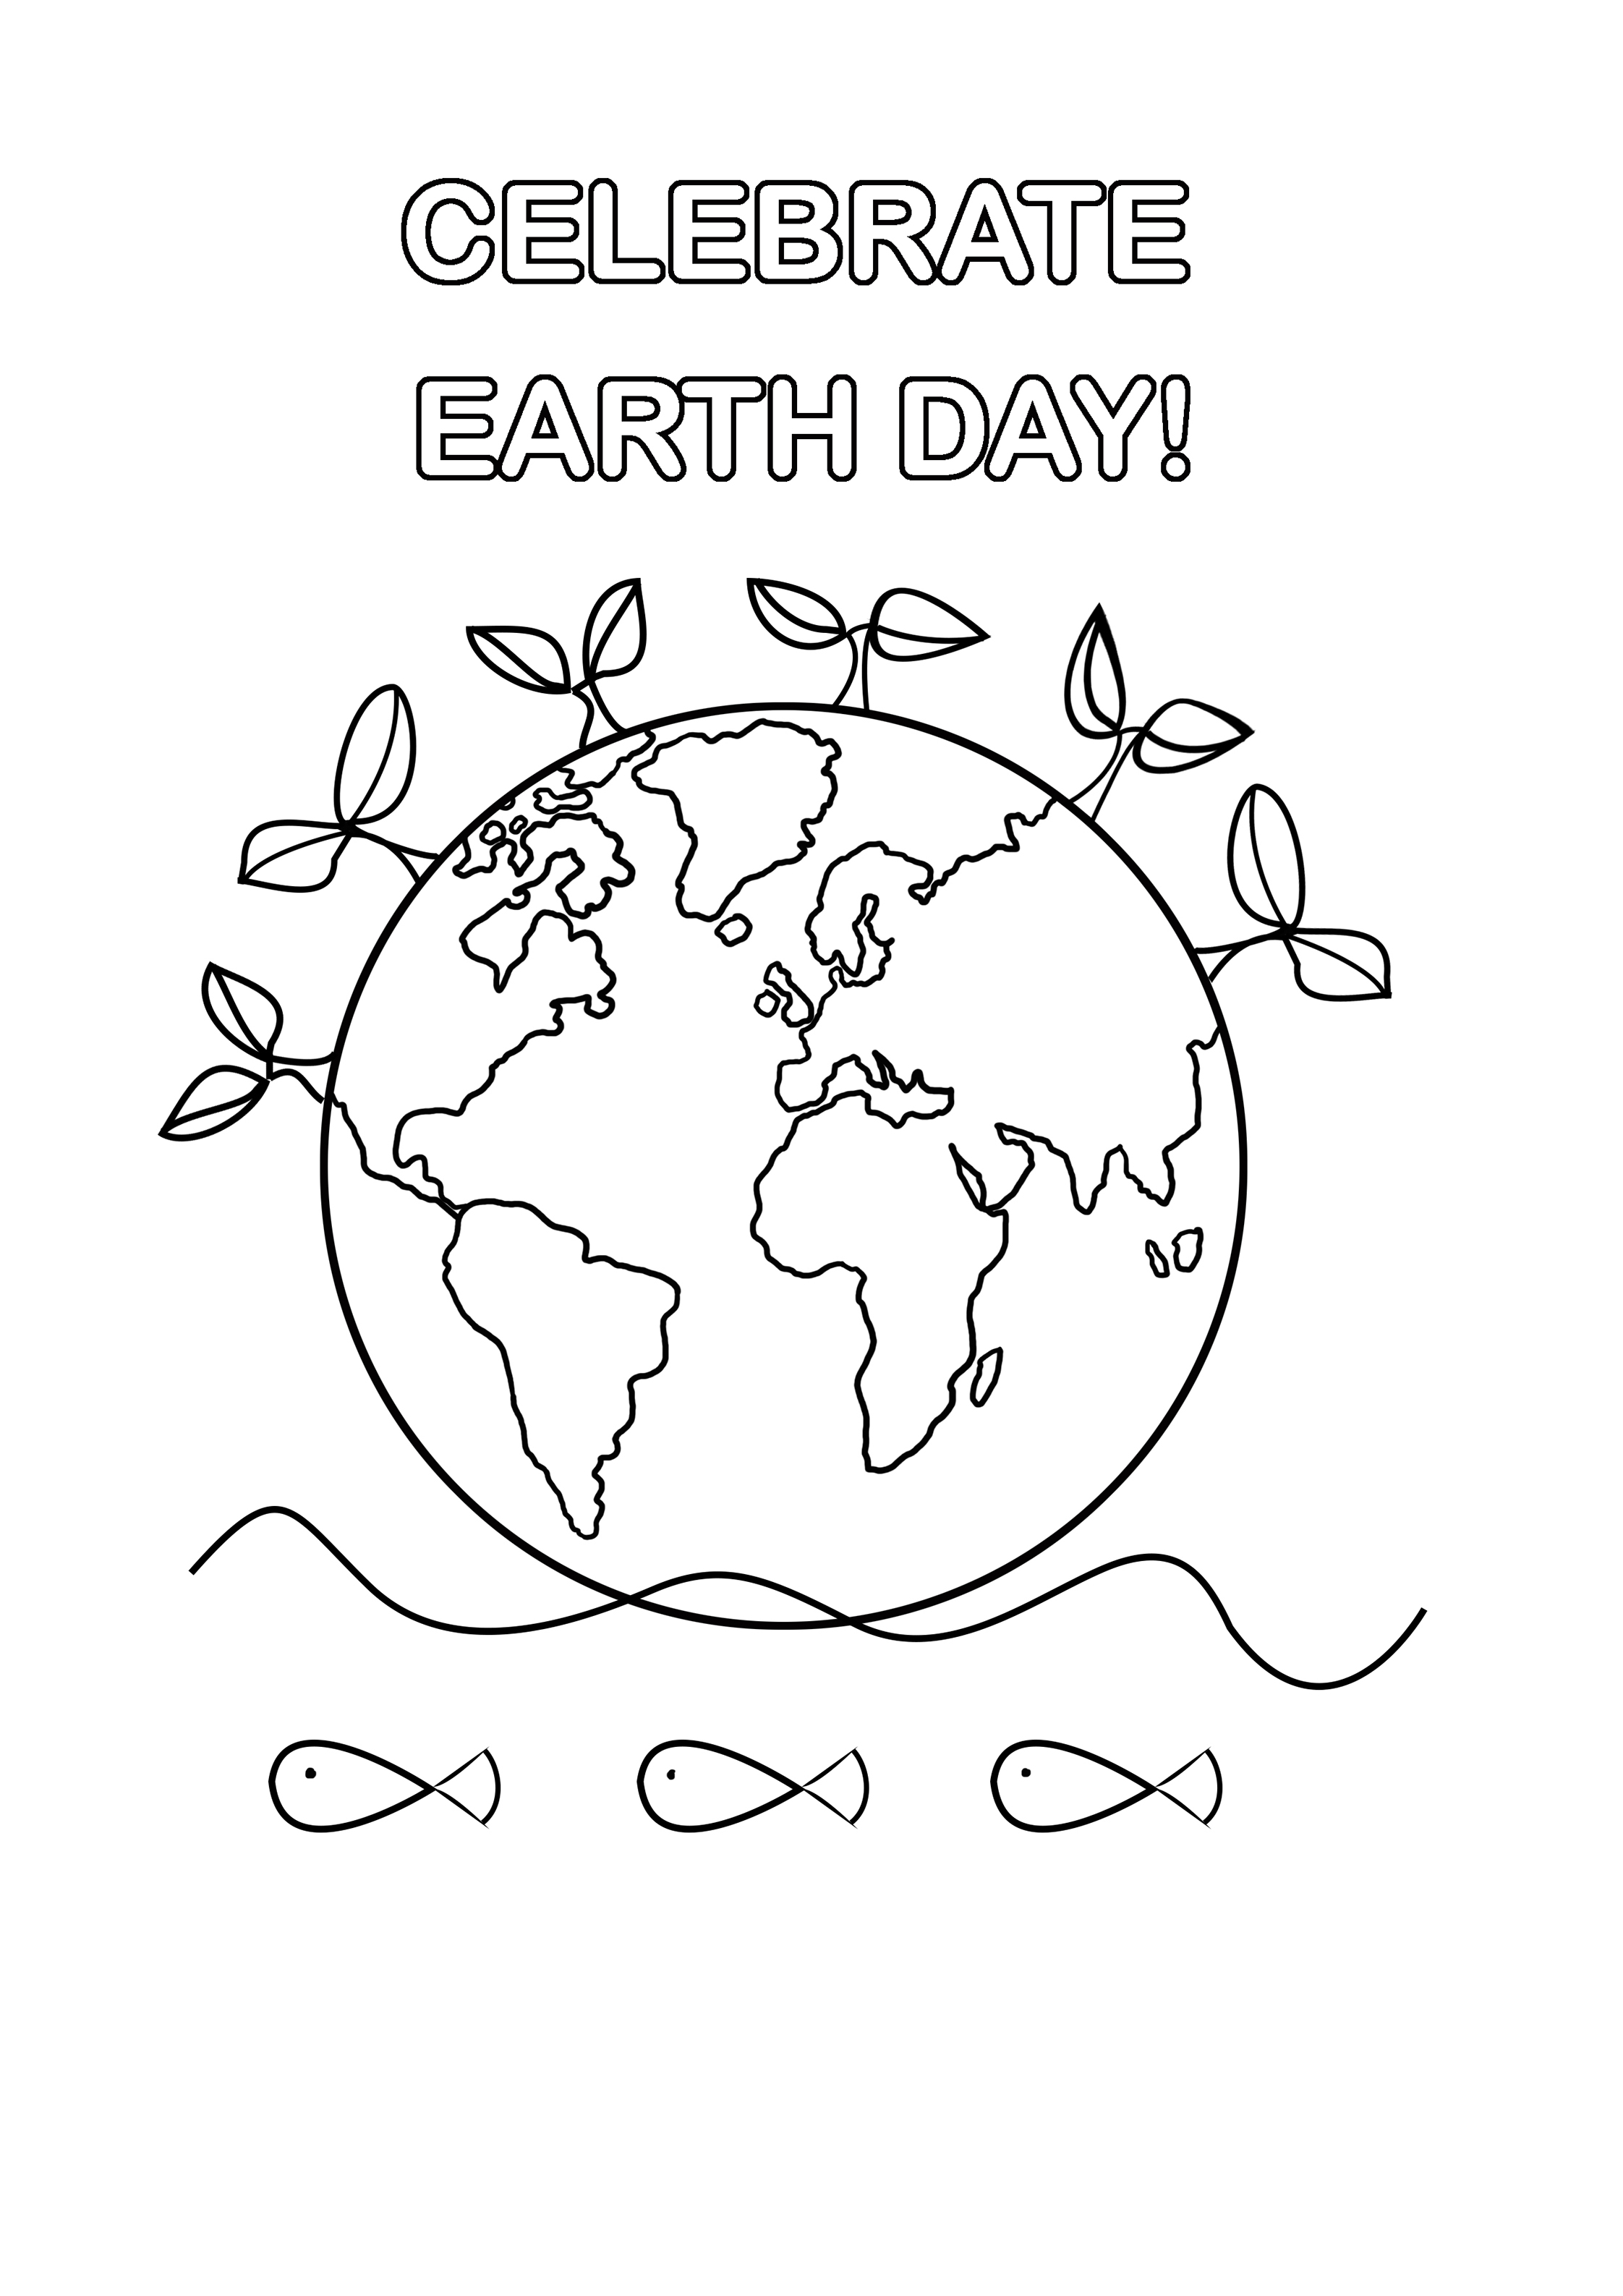 free printable earth coloring pages for kids - free printable earth